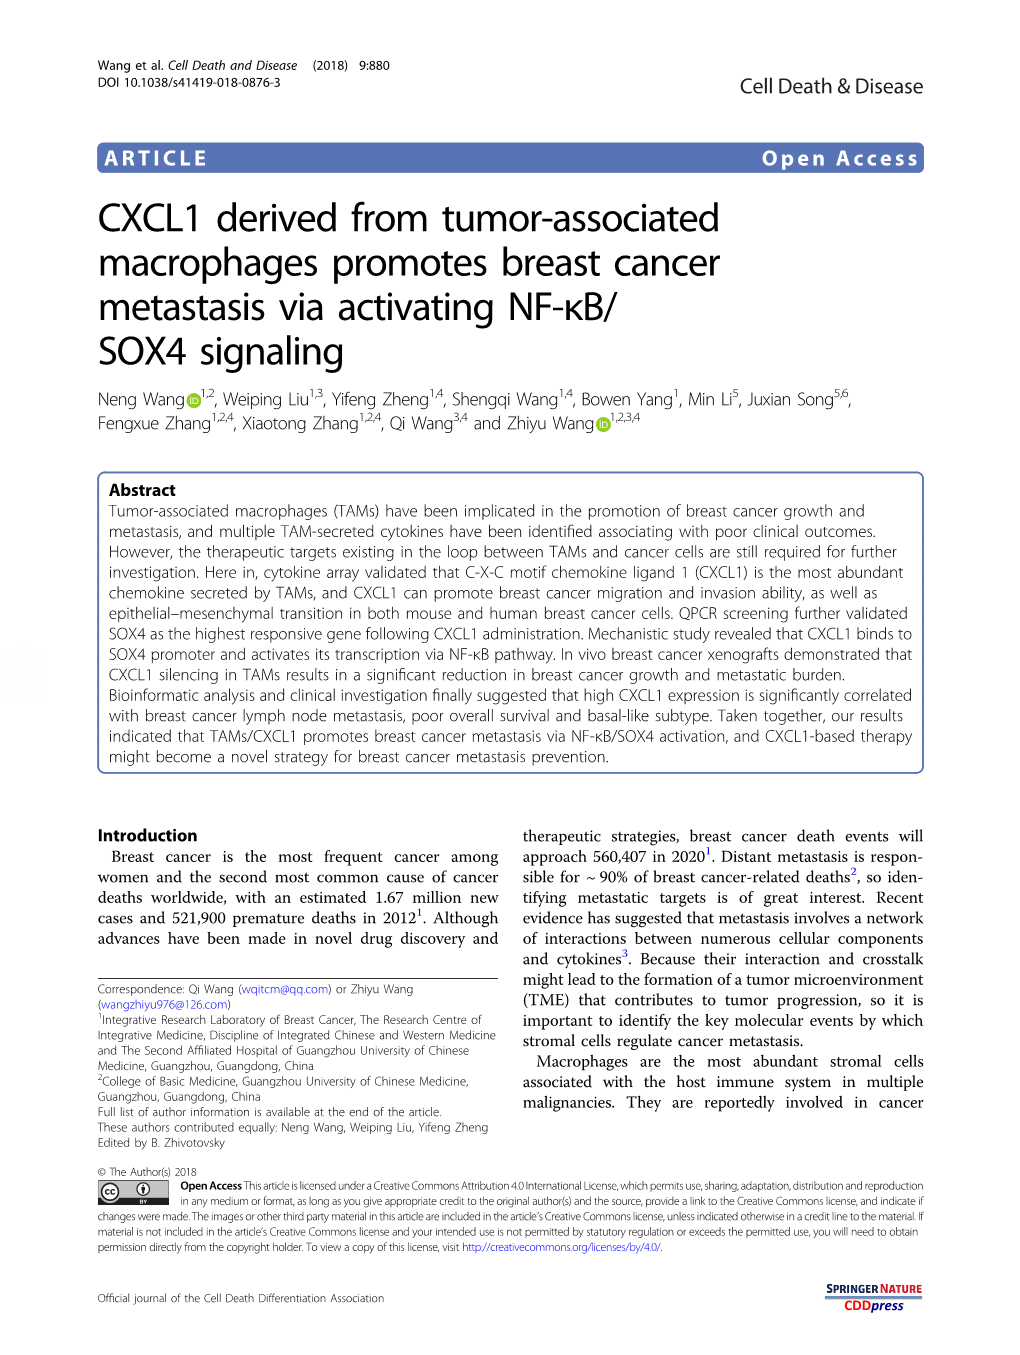 CXCL1 Derived from Tumor-Associated Macrophages